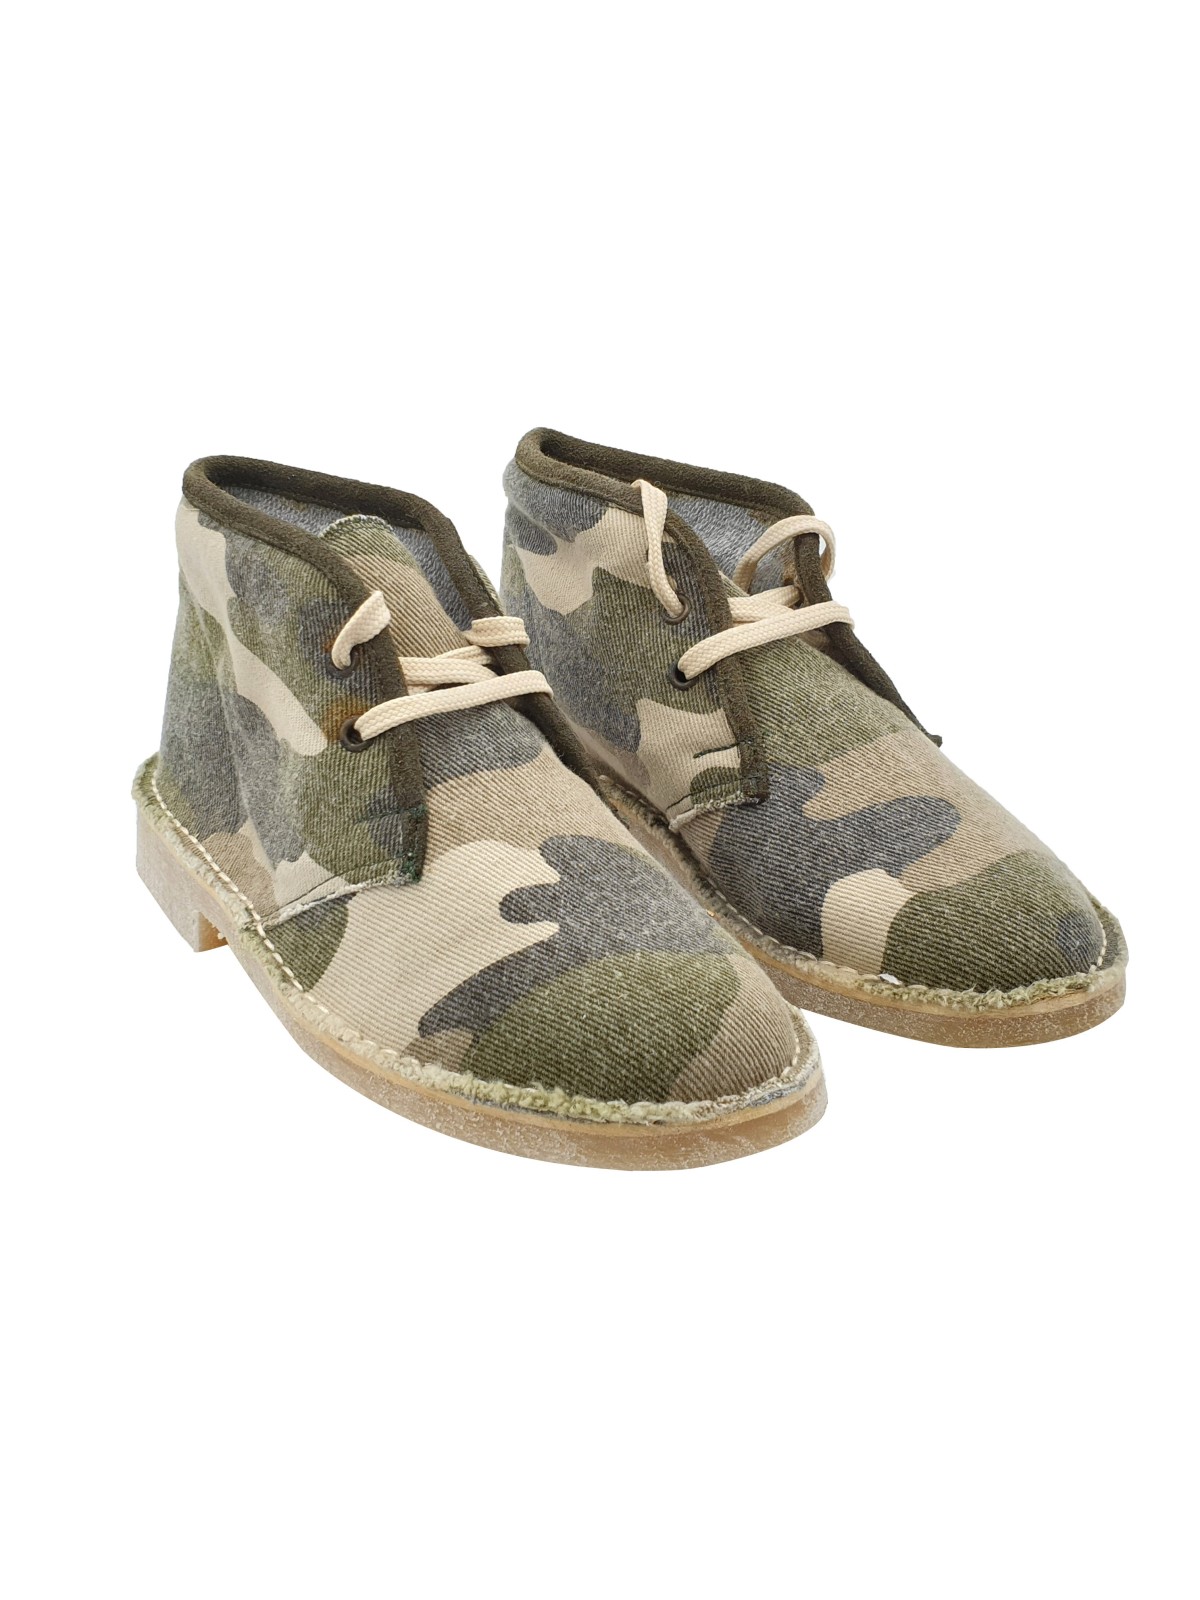 CAMOUFLAGE ANKLE BOOT WITH LACES - size 37